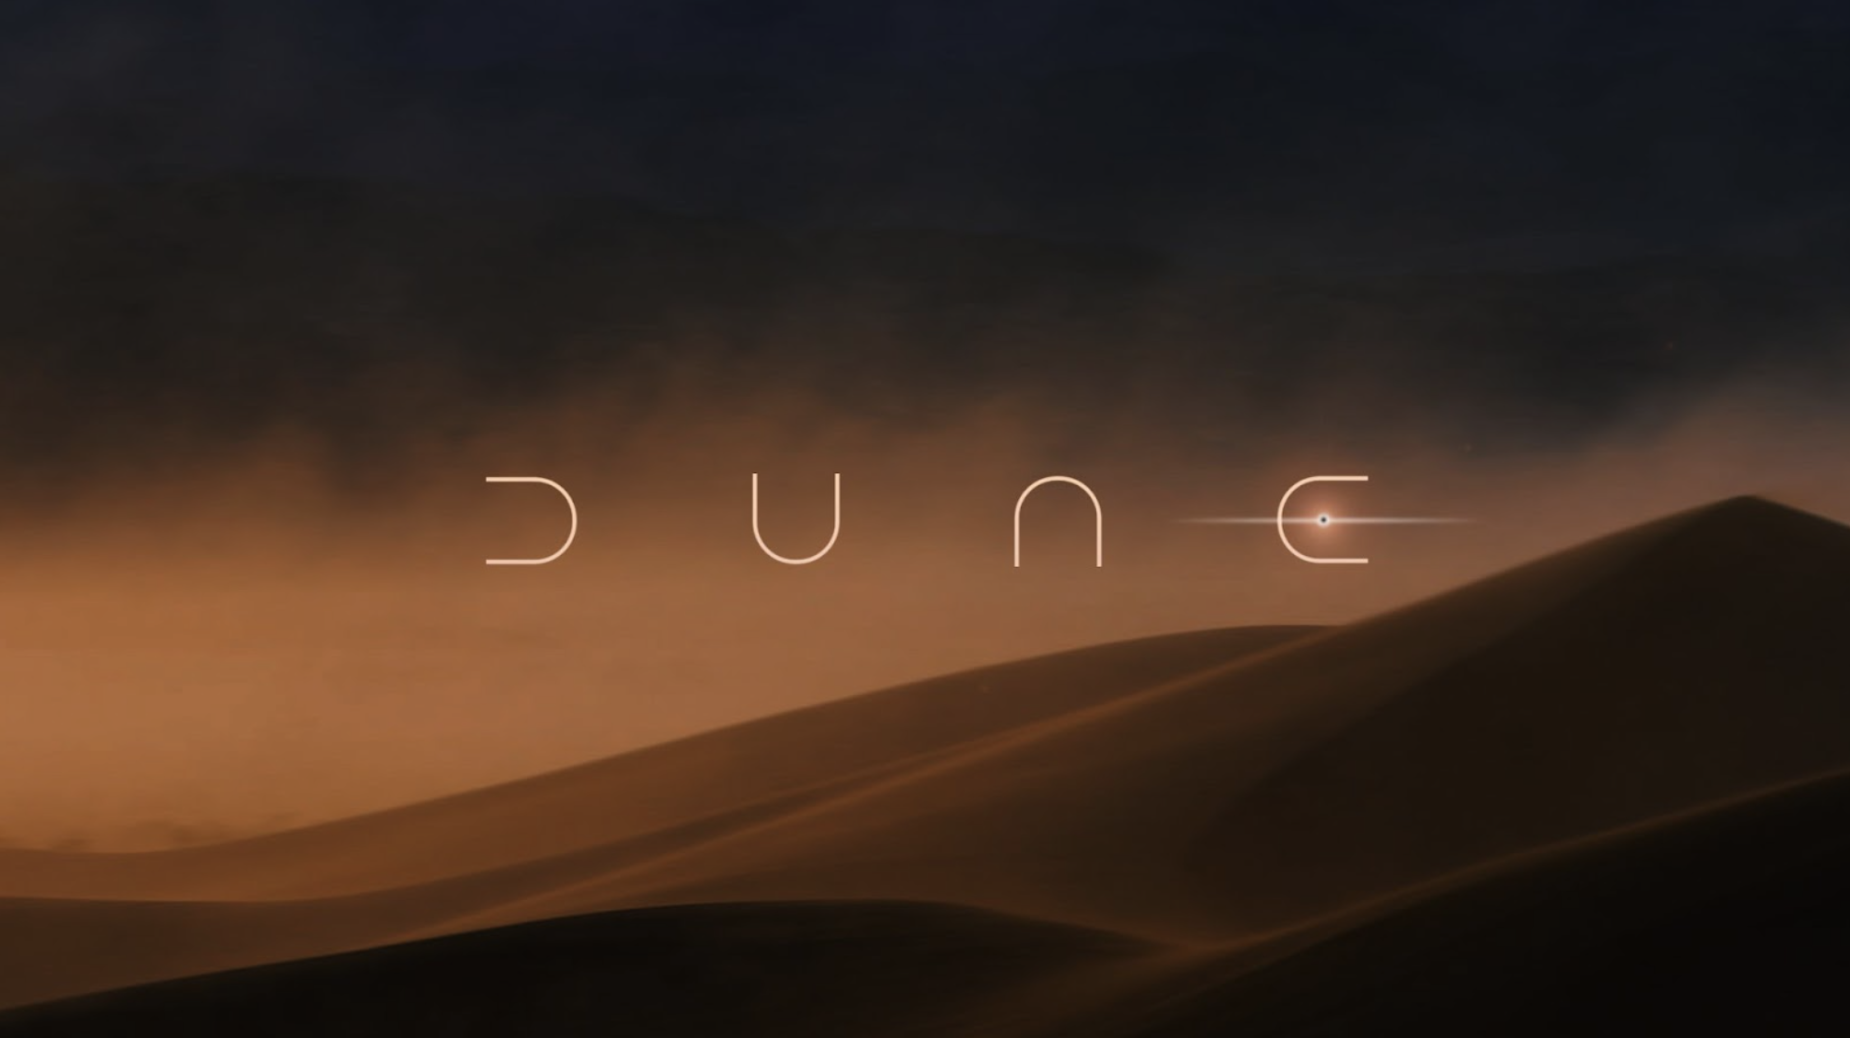 Title screen from the film, "Dune."